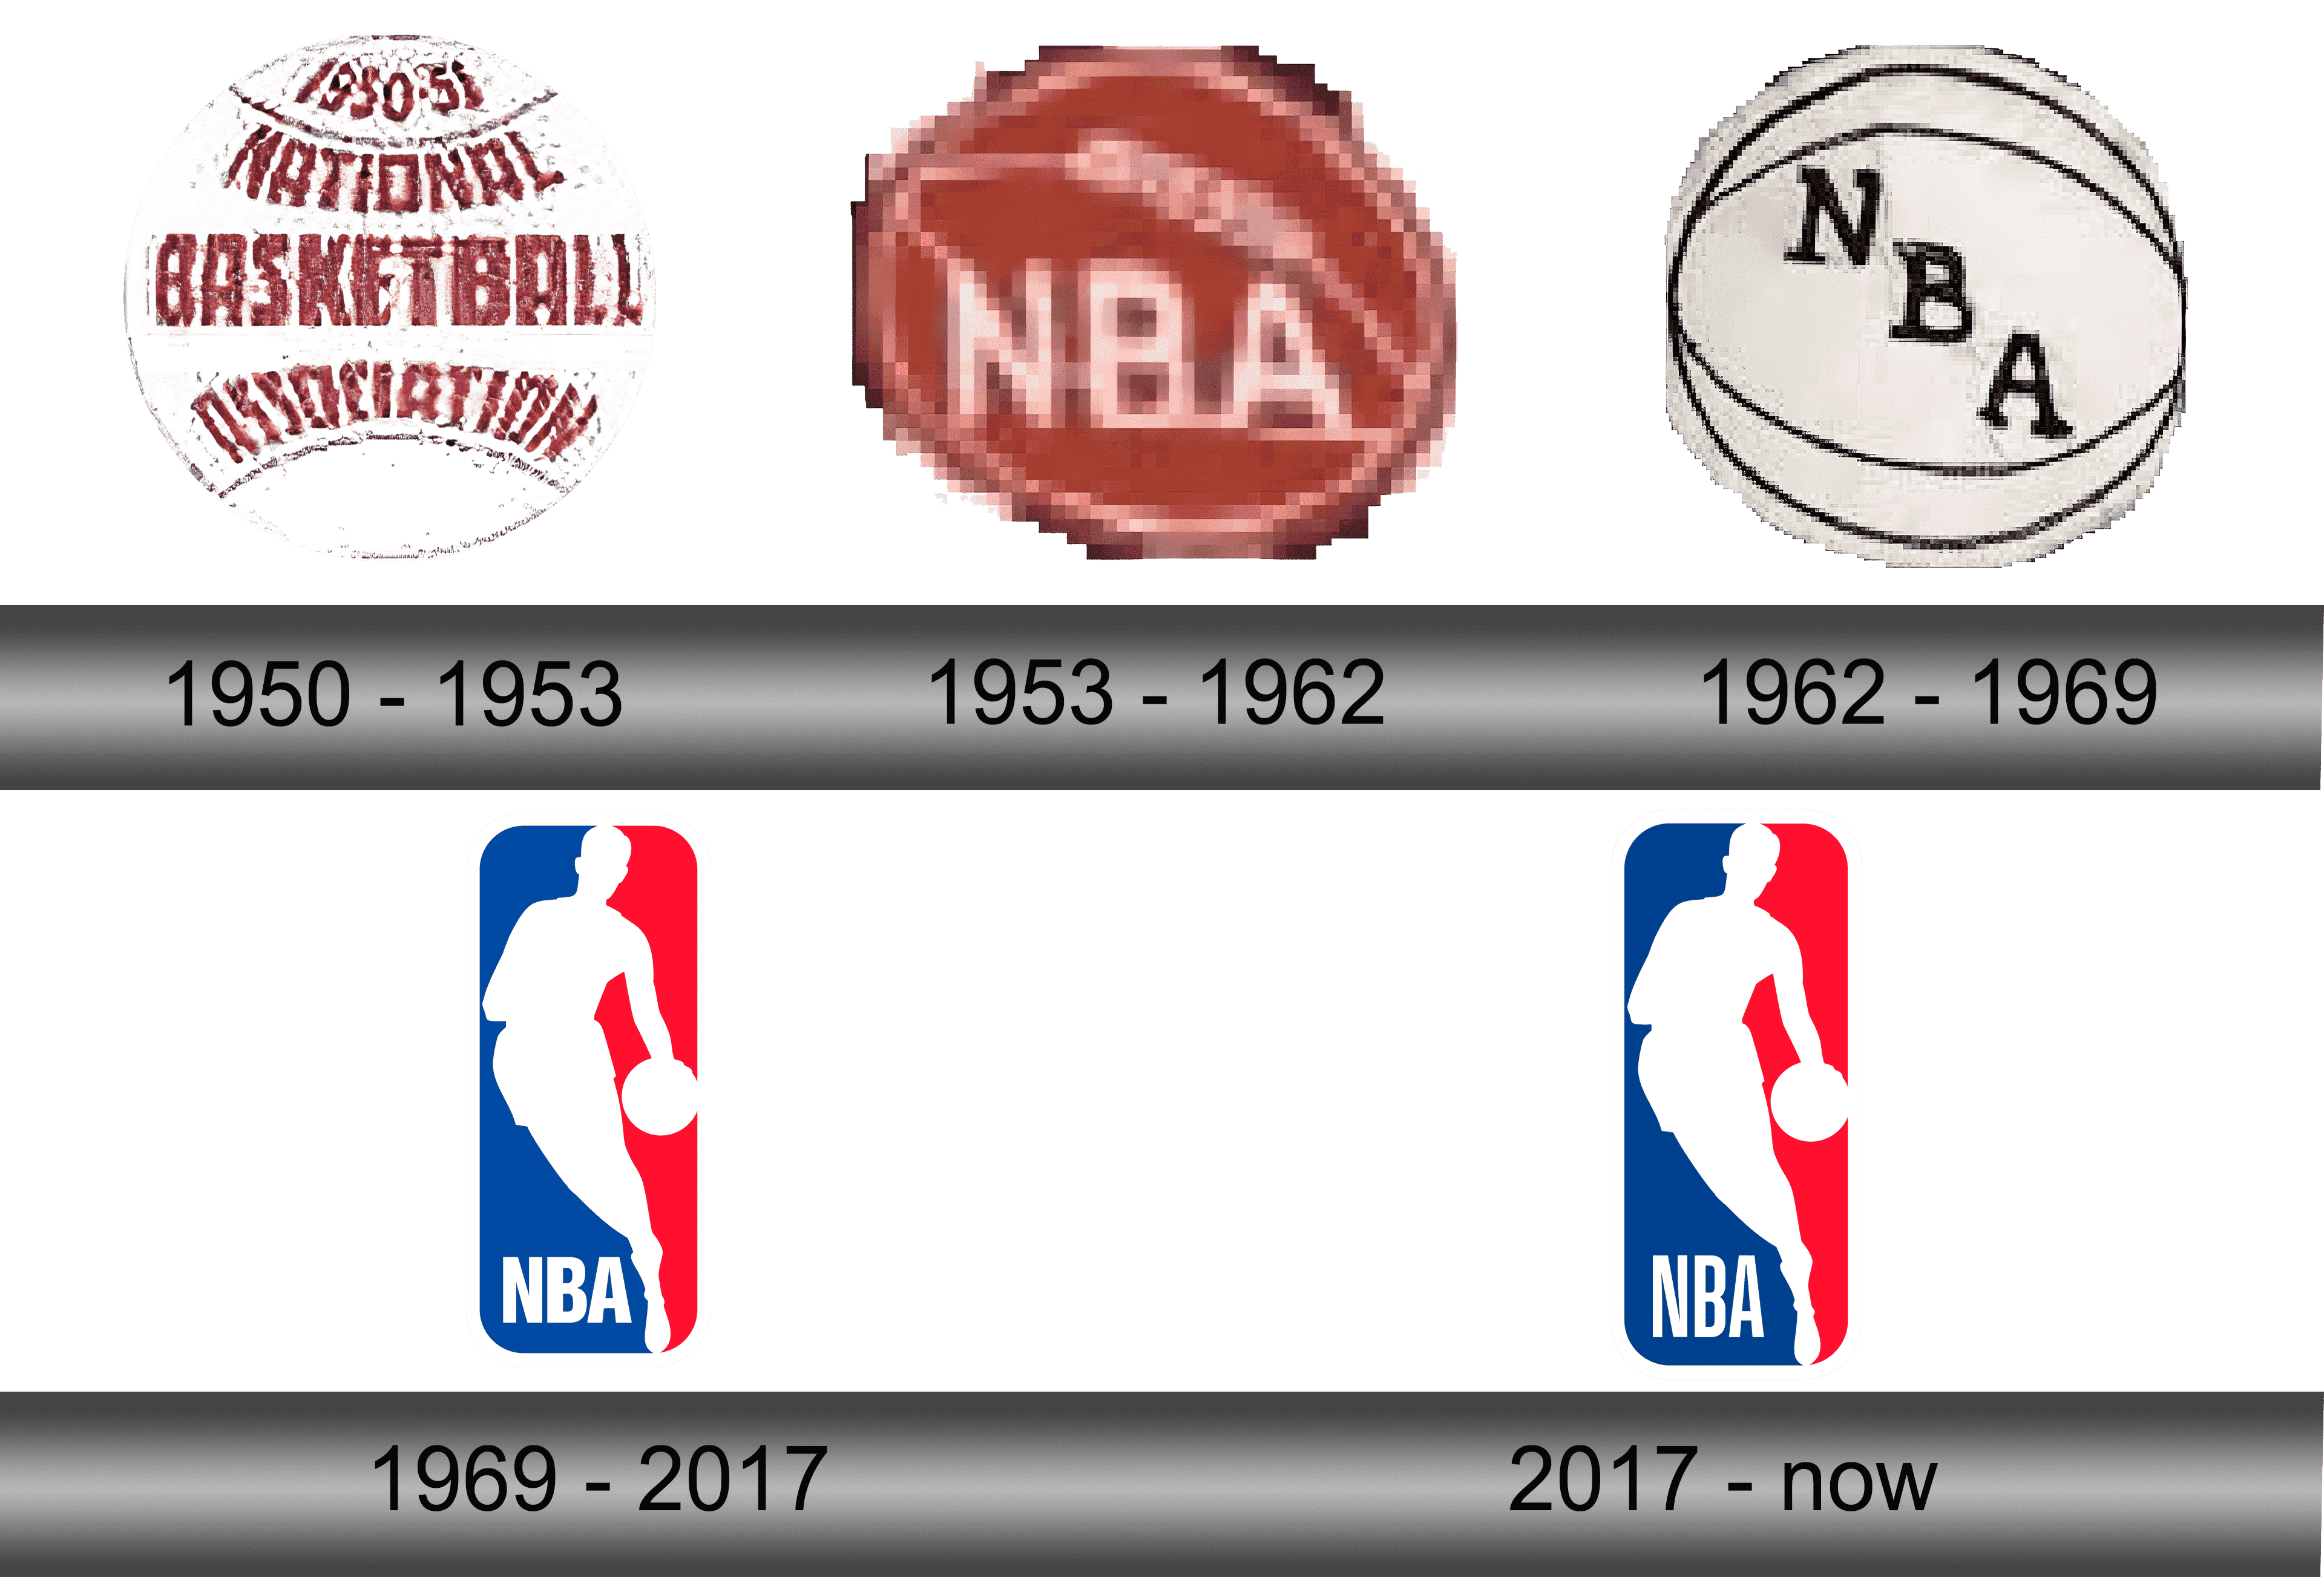 NBA Logo and symbol, meaning, history, sign.